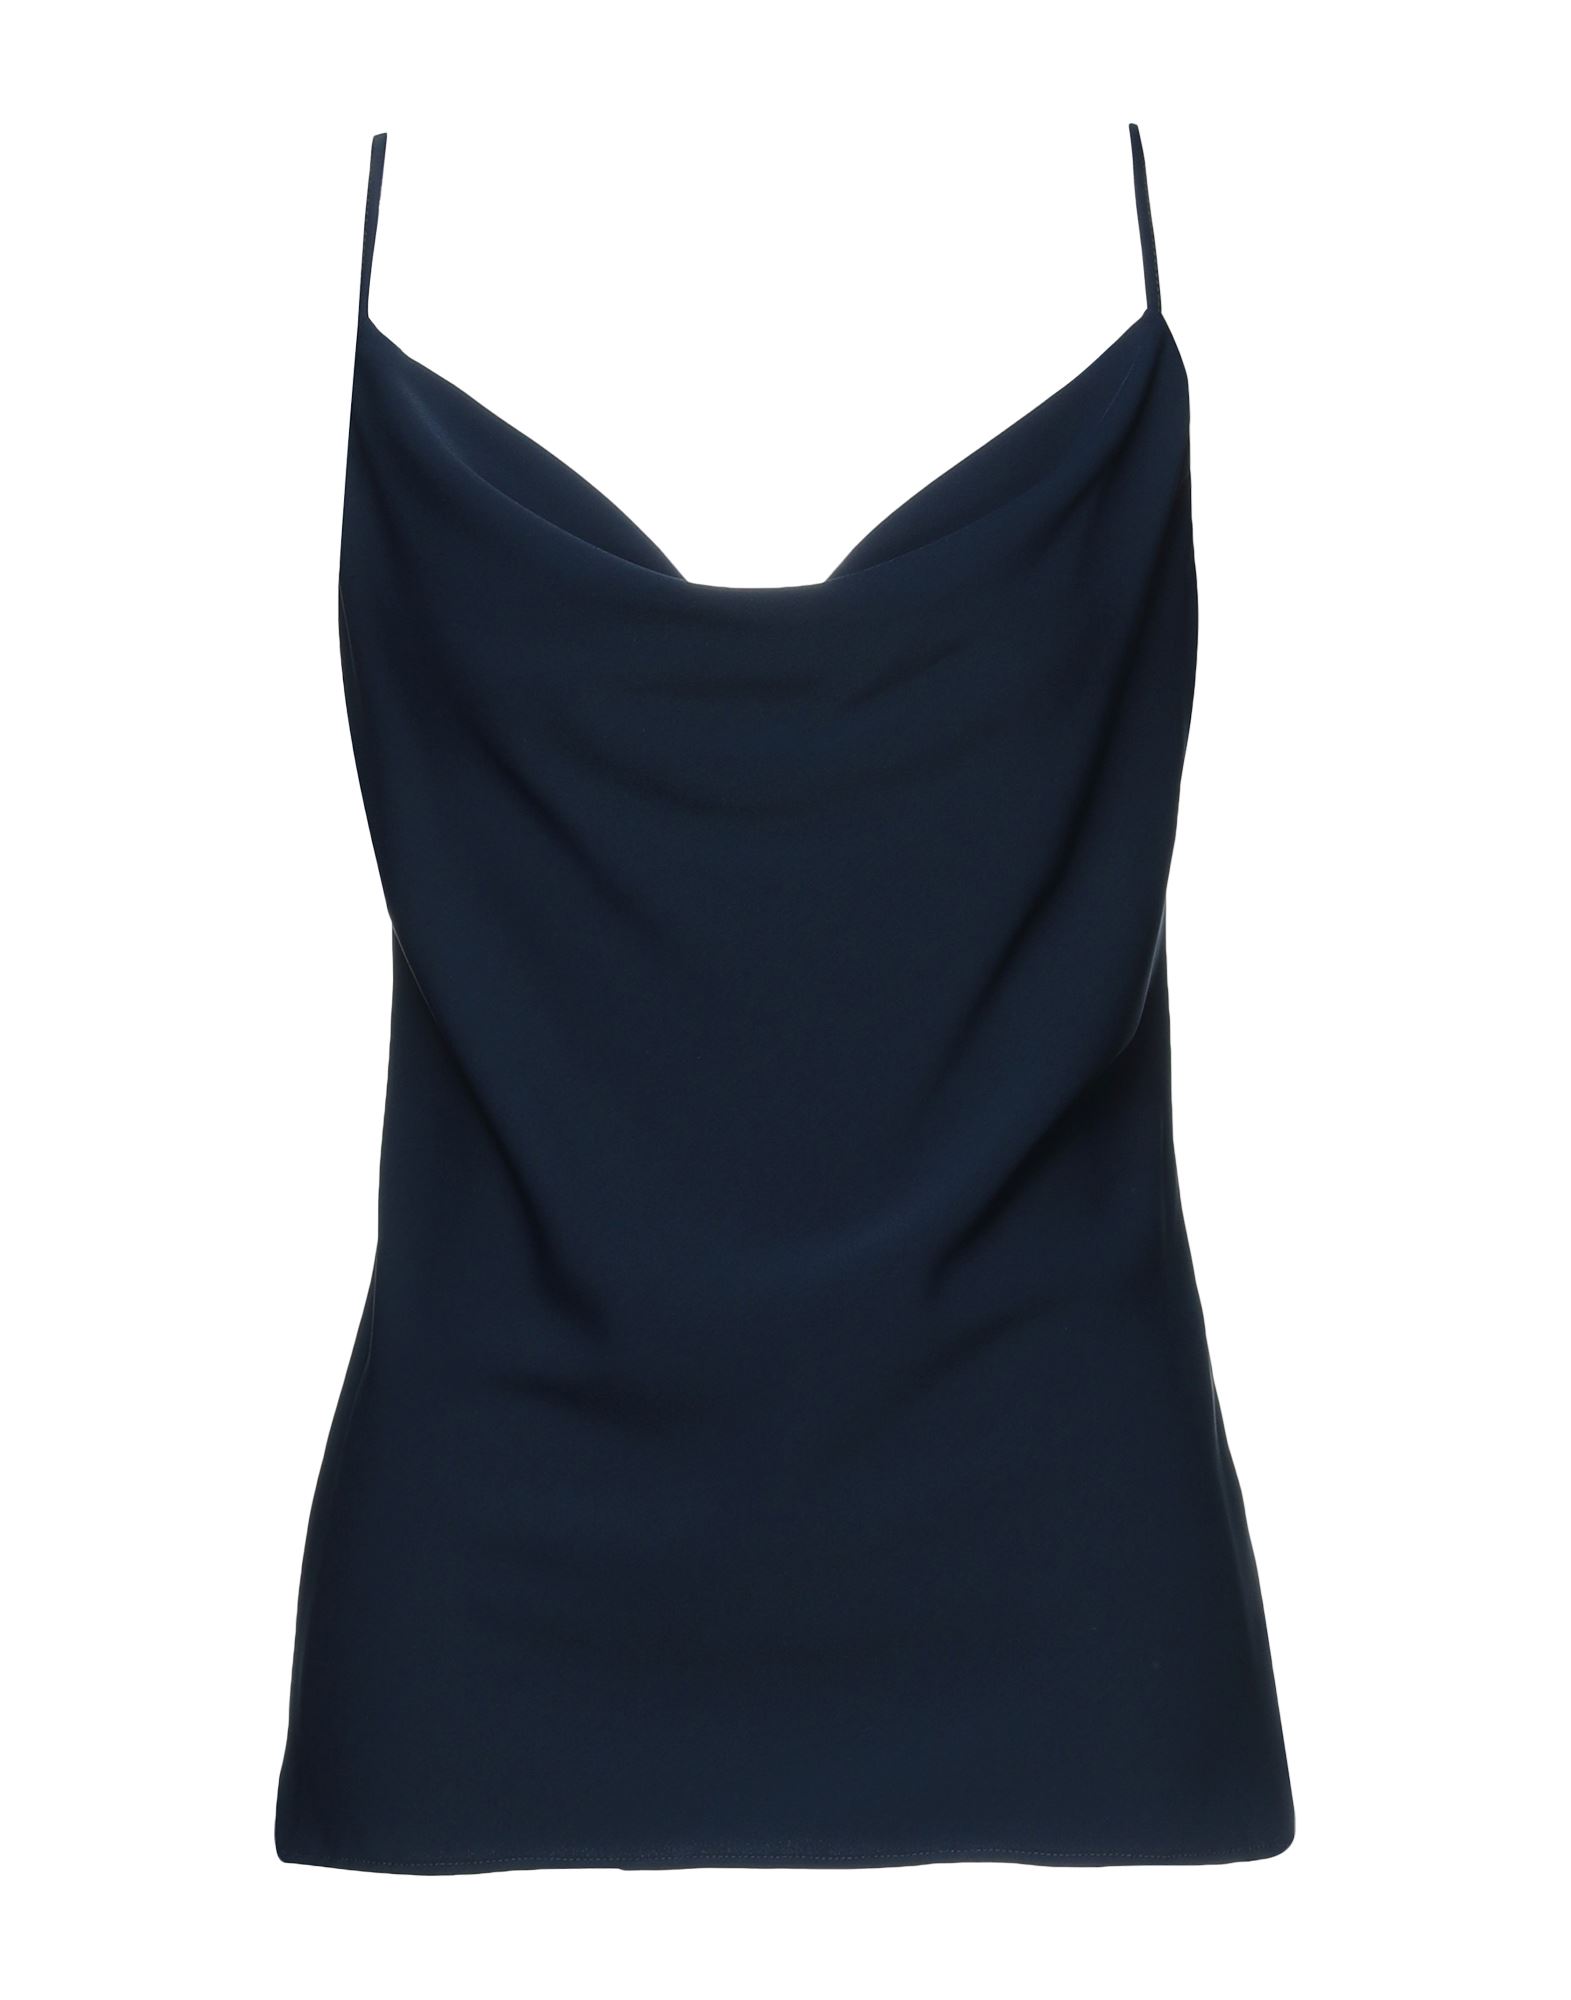 P.A.R.O.S.H P. A.R. O.S. H. WOMAN TOP MIDNIGHT BLUE SIZE S POLYESTER